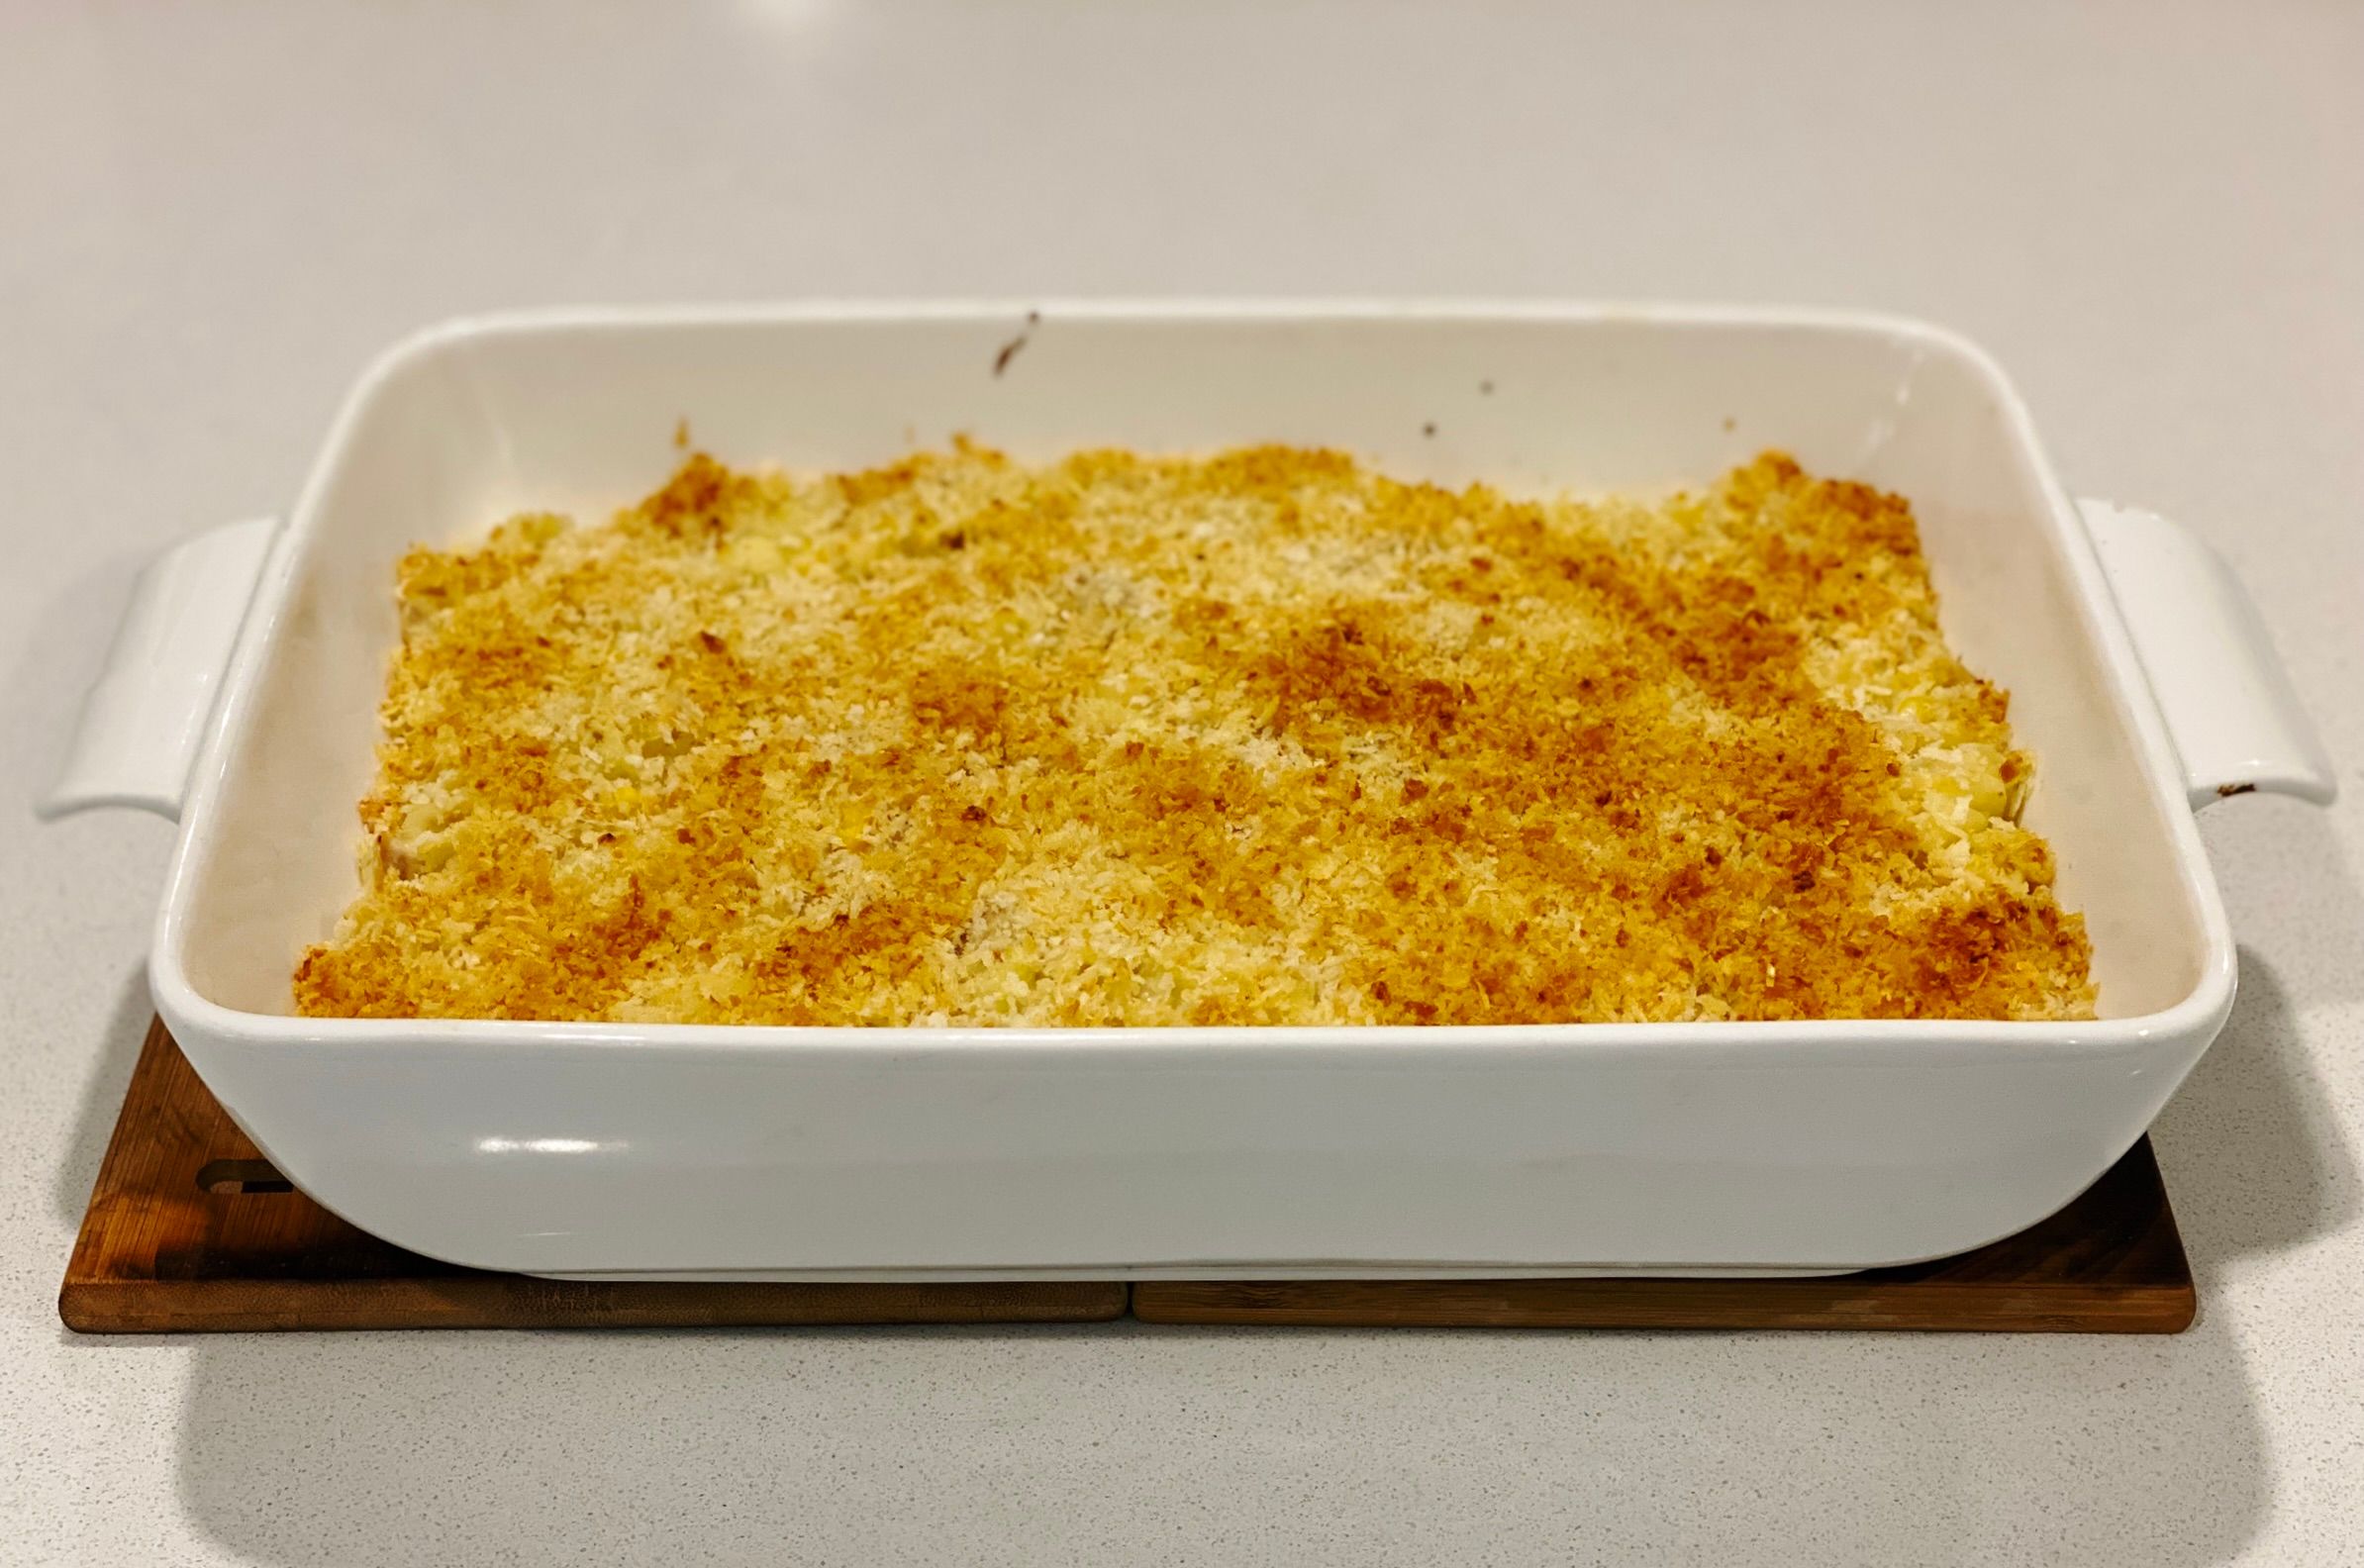 A photo of a big white rectangular casserole dish with food in it, but you can't make out what's underneath the crunchy golden brown panko breadcrumb topping. It looks amazing though.